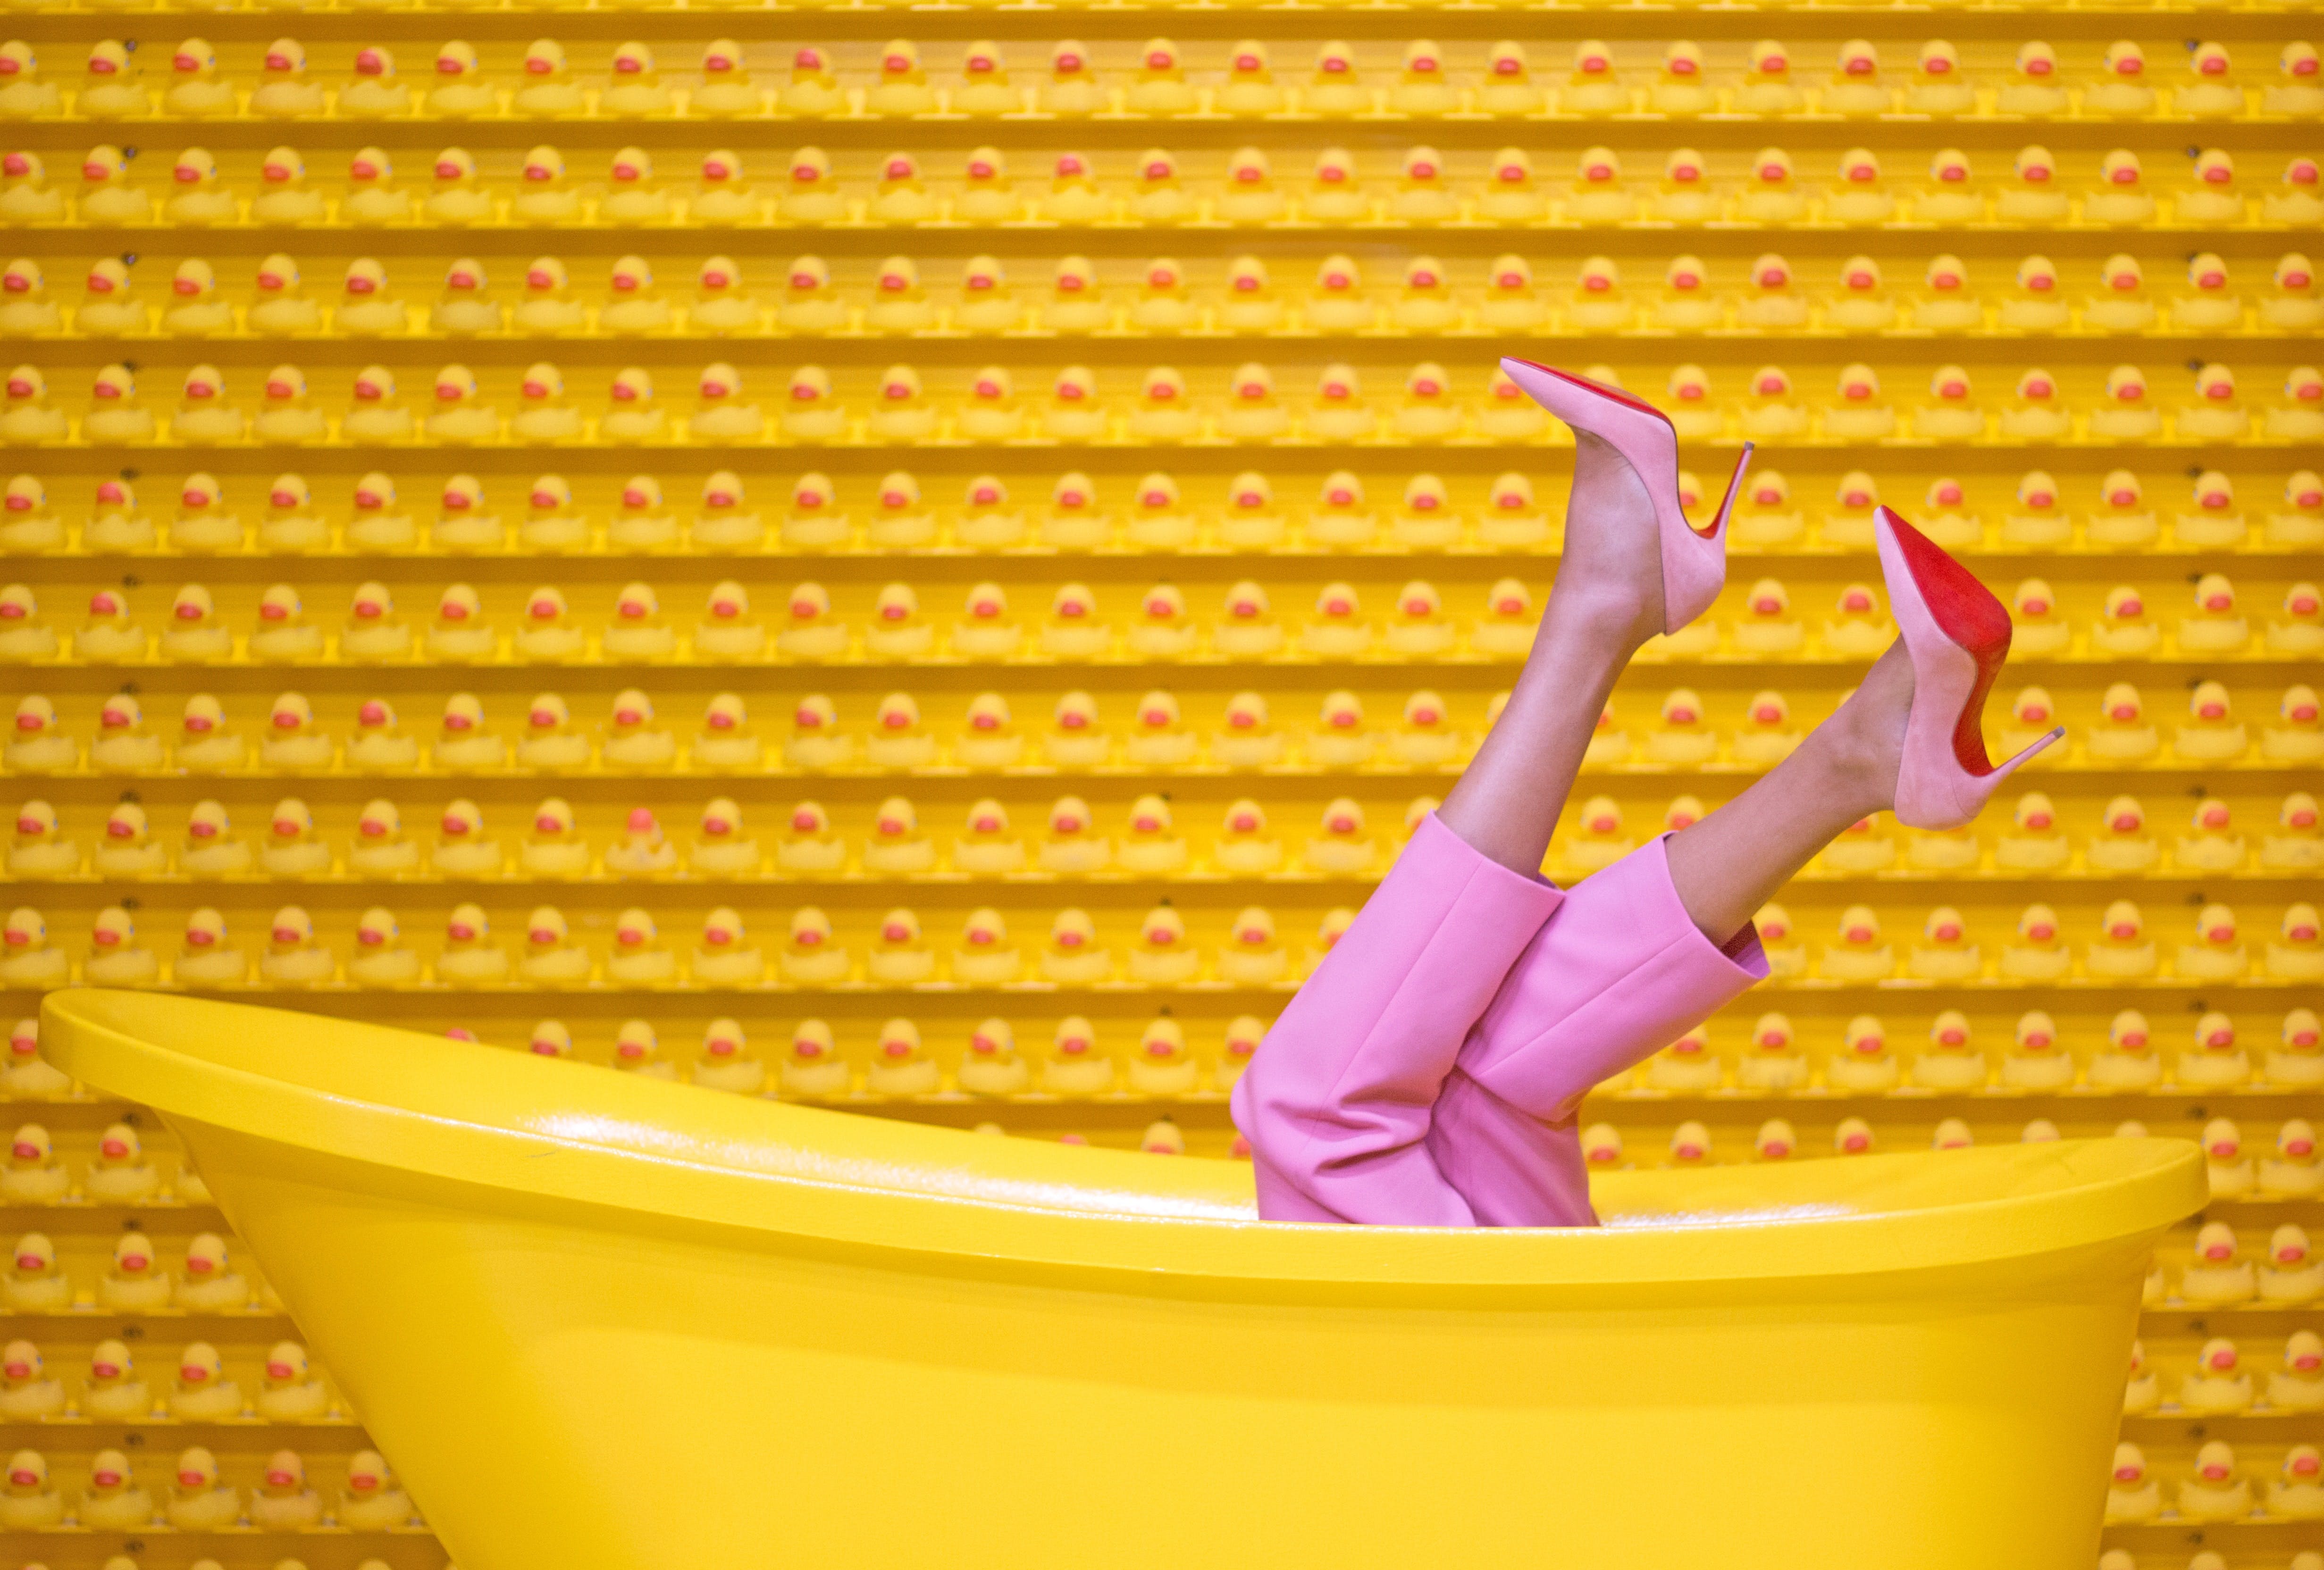 Women in pink clothes sit in a yellow bathtub in front of a yellow wall with red dots